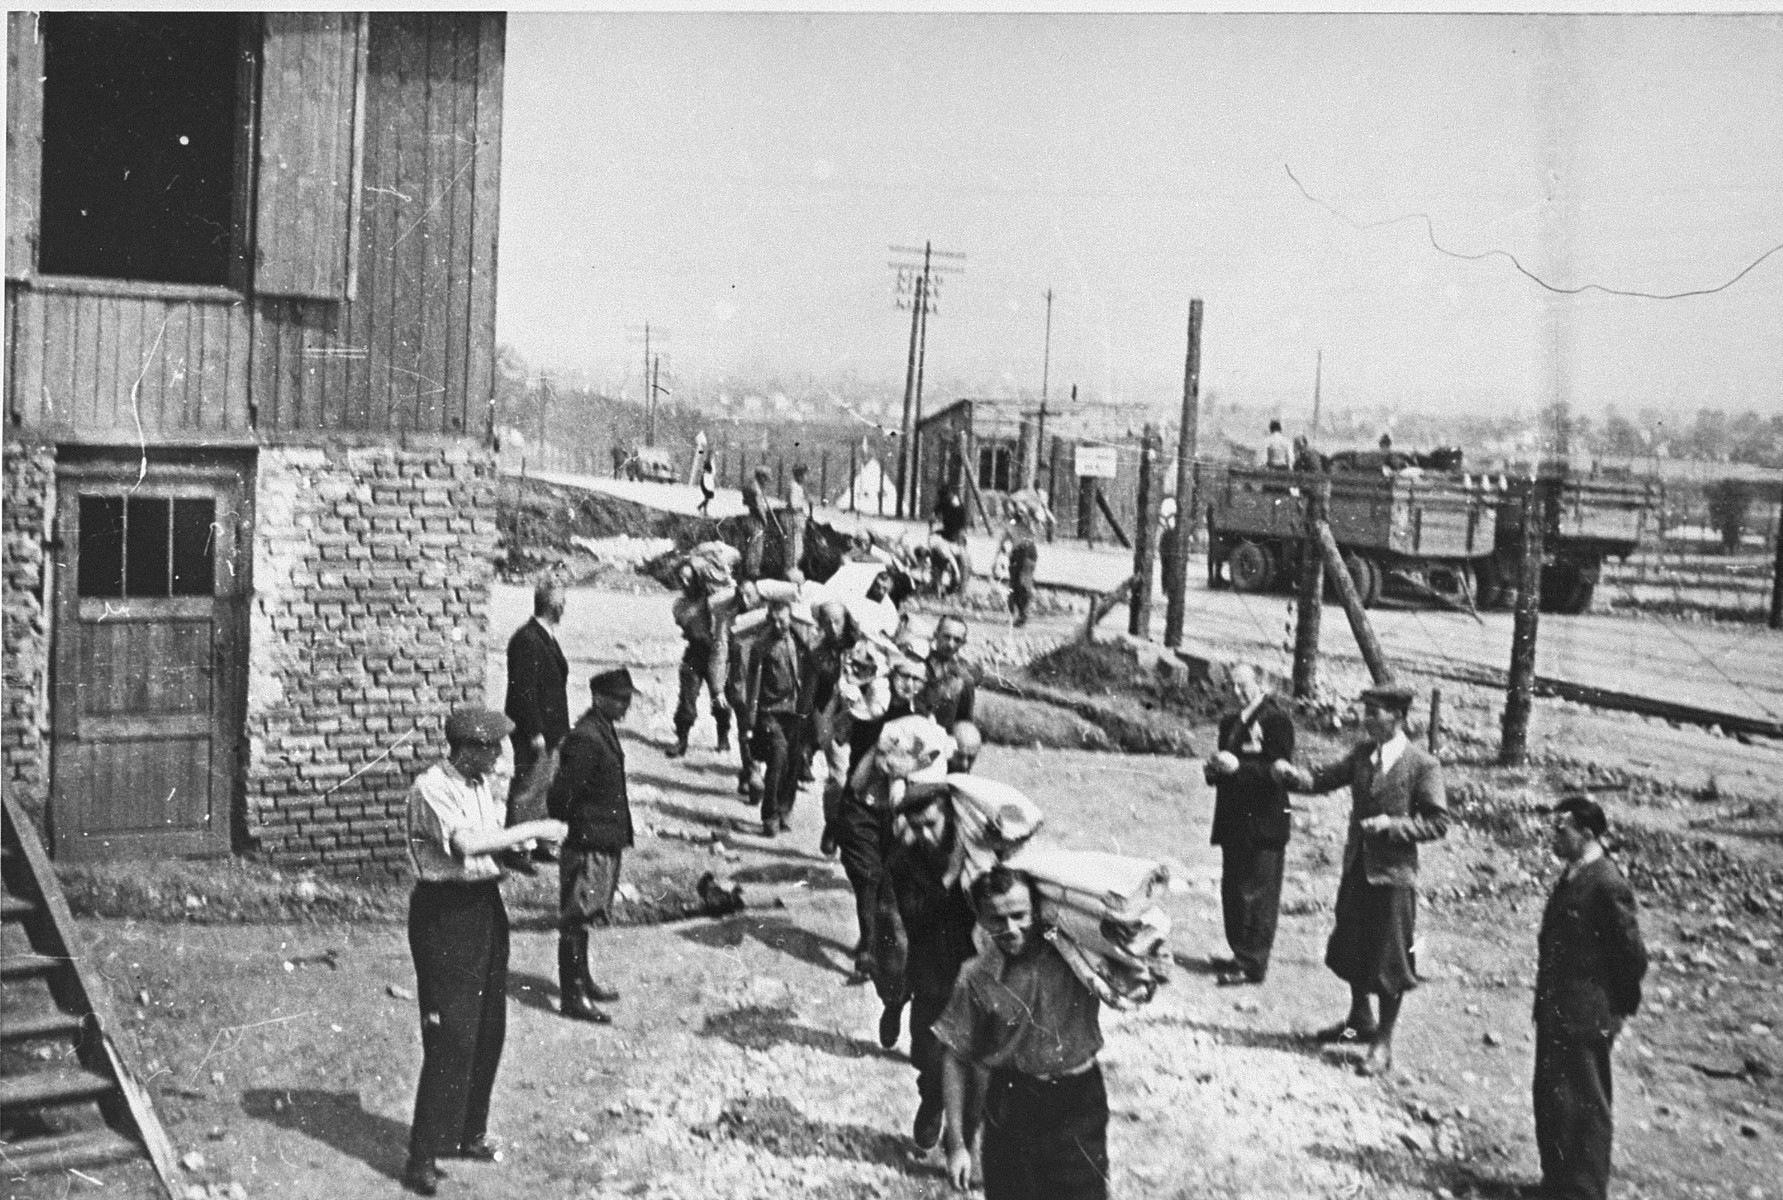 Jewish prisoners carry bolts of cloth to the Madritch factory in Plaszow.  The Madritch factory utilized concentration camp labor to produce uniforms for the German army.